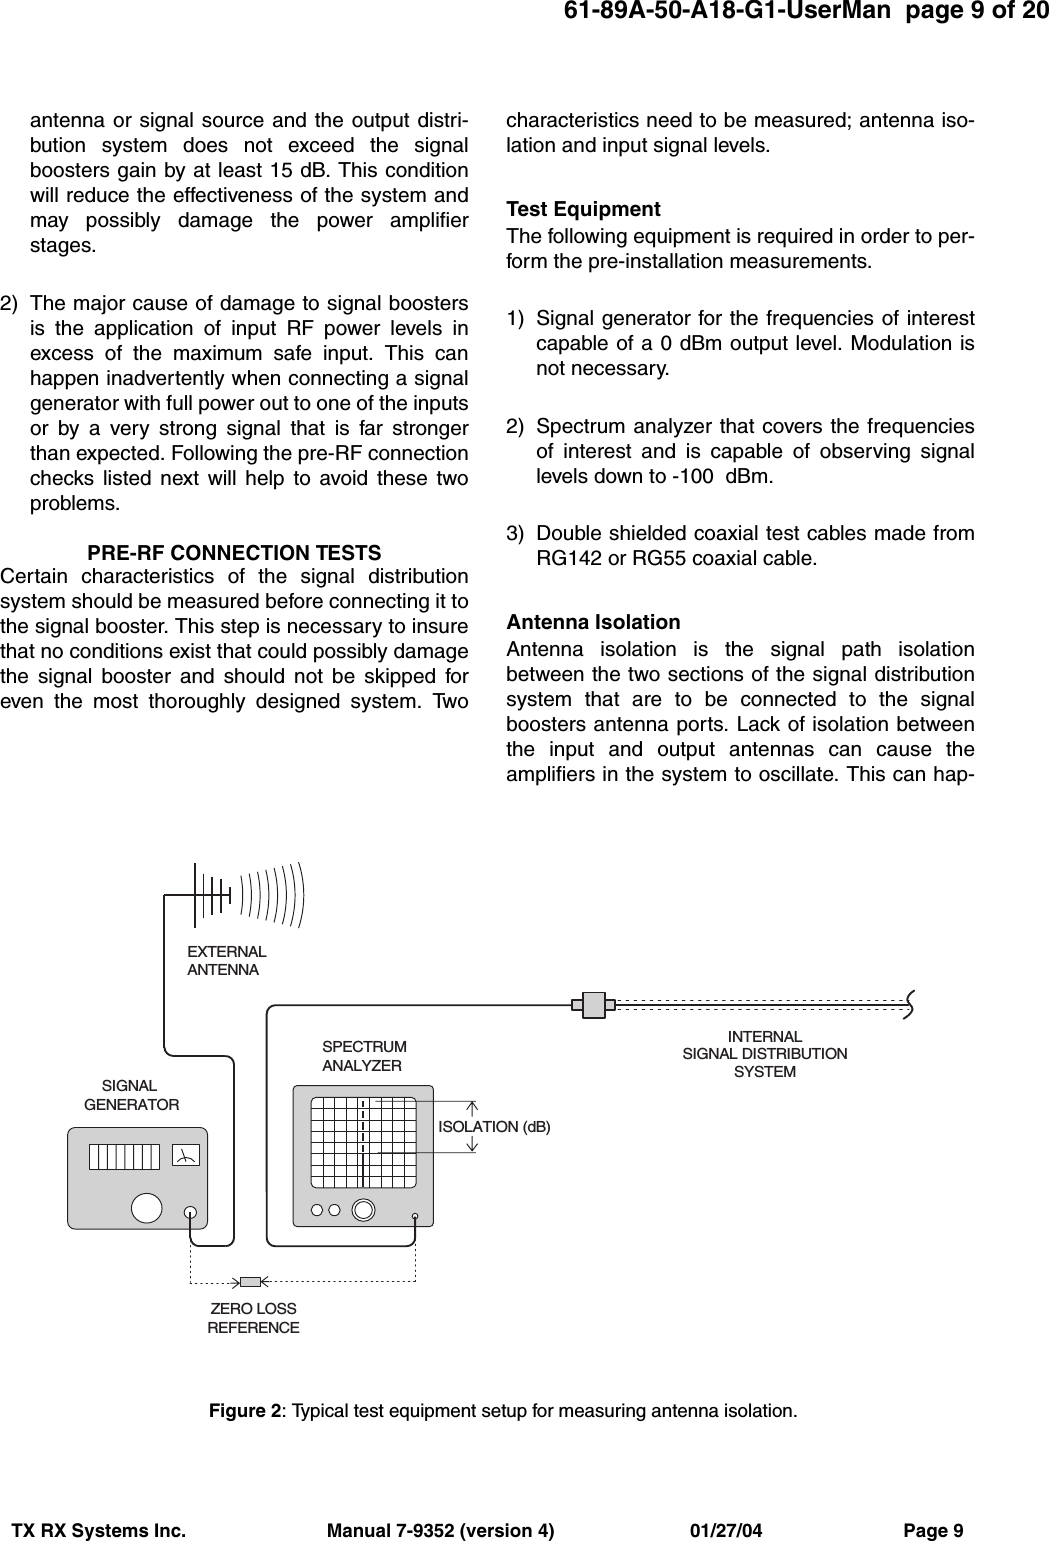 61-89A-50-A18-G1-UserMan  page 9 of 20TX RX Systems Inc.                           Manual 7-9352 (version 4)                          01/27/04                           Page 9antenna or signal source and the output distri-bution system does not exceed the signalboosters gain by at least 15 dB. This conditionwill reduce the effectiveness of the system andmay possibly damage the power amplifierstages.2) The major cause of damage to signal boostersis the application of input RF power levels inexcess of the maximum safe input. This canhappen inadvertently when connecting a signalgenerator with full power out to one of the inputsor by a very strong signal that is far strongerthan expected. Following the pre-RF connectionchecks listed next will help to avoid these twoproblems.PRE-RF CONNECTION TESTSCertain characteristics of the signal distributionsystem should be measured before connecting it tothe signal booster. This step is necessary to insurethat no conditions exist that could possibly damagethe signal booster and should not be skipped foreven the most thoroughly designed system. Twocharacteristics need to be measured; antenna iso-lation and input signal levels.Test EquipmentThe following equipment is required in order to per-form the pre-installation measurements.1) Signal generator for the frequencies of interestcapable of a 0 dBm output level. Modulation isnot necessary.2) Spectrum analyzer that covers the frequenciesof interest and is capable of observing signallevels down to -100  dBm.3) Double shielded coaxial test cables made fromRG142 or RG55 coaxial cable.Antenna Isolation Antenna isolation is the signal path isolationbetween the two sections of the signal distributionsystem that are to be connected to the signalboosters antenna ports. Lack of isolation betweenthe input and output antennas can cause theamplifiers in the system to oscillate. This can hap-INTERNALSIGNAL DISTRIBUTIONSYSTEMSPECTRUMANALYZEREXTERNALANTENNASIGNALGENERATORZERO LOSSREFERENCEISOLATION (dB)Figure 2: Typical test equipment setup for measuring antenna isolation.